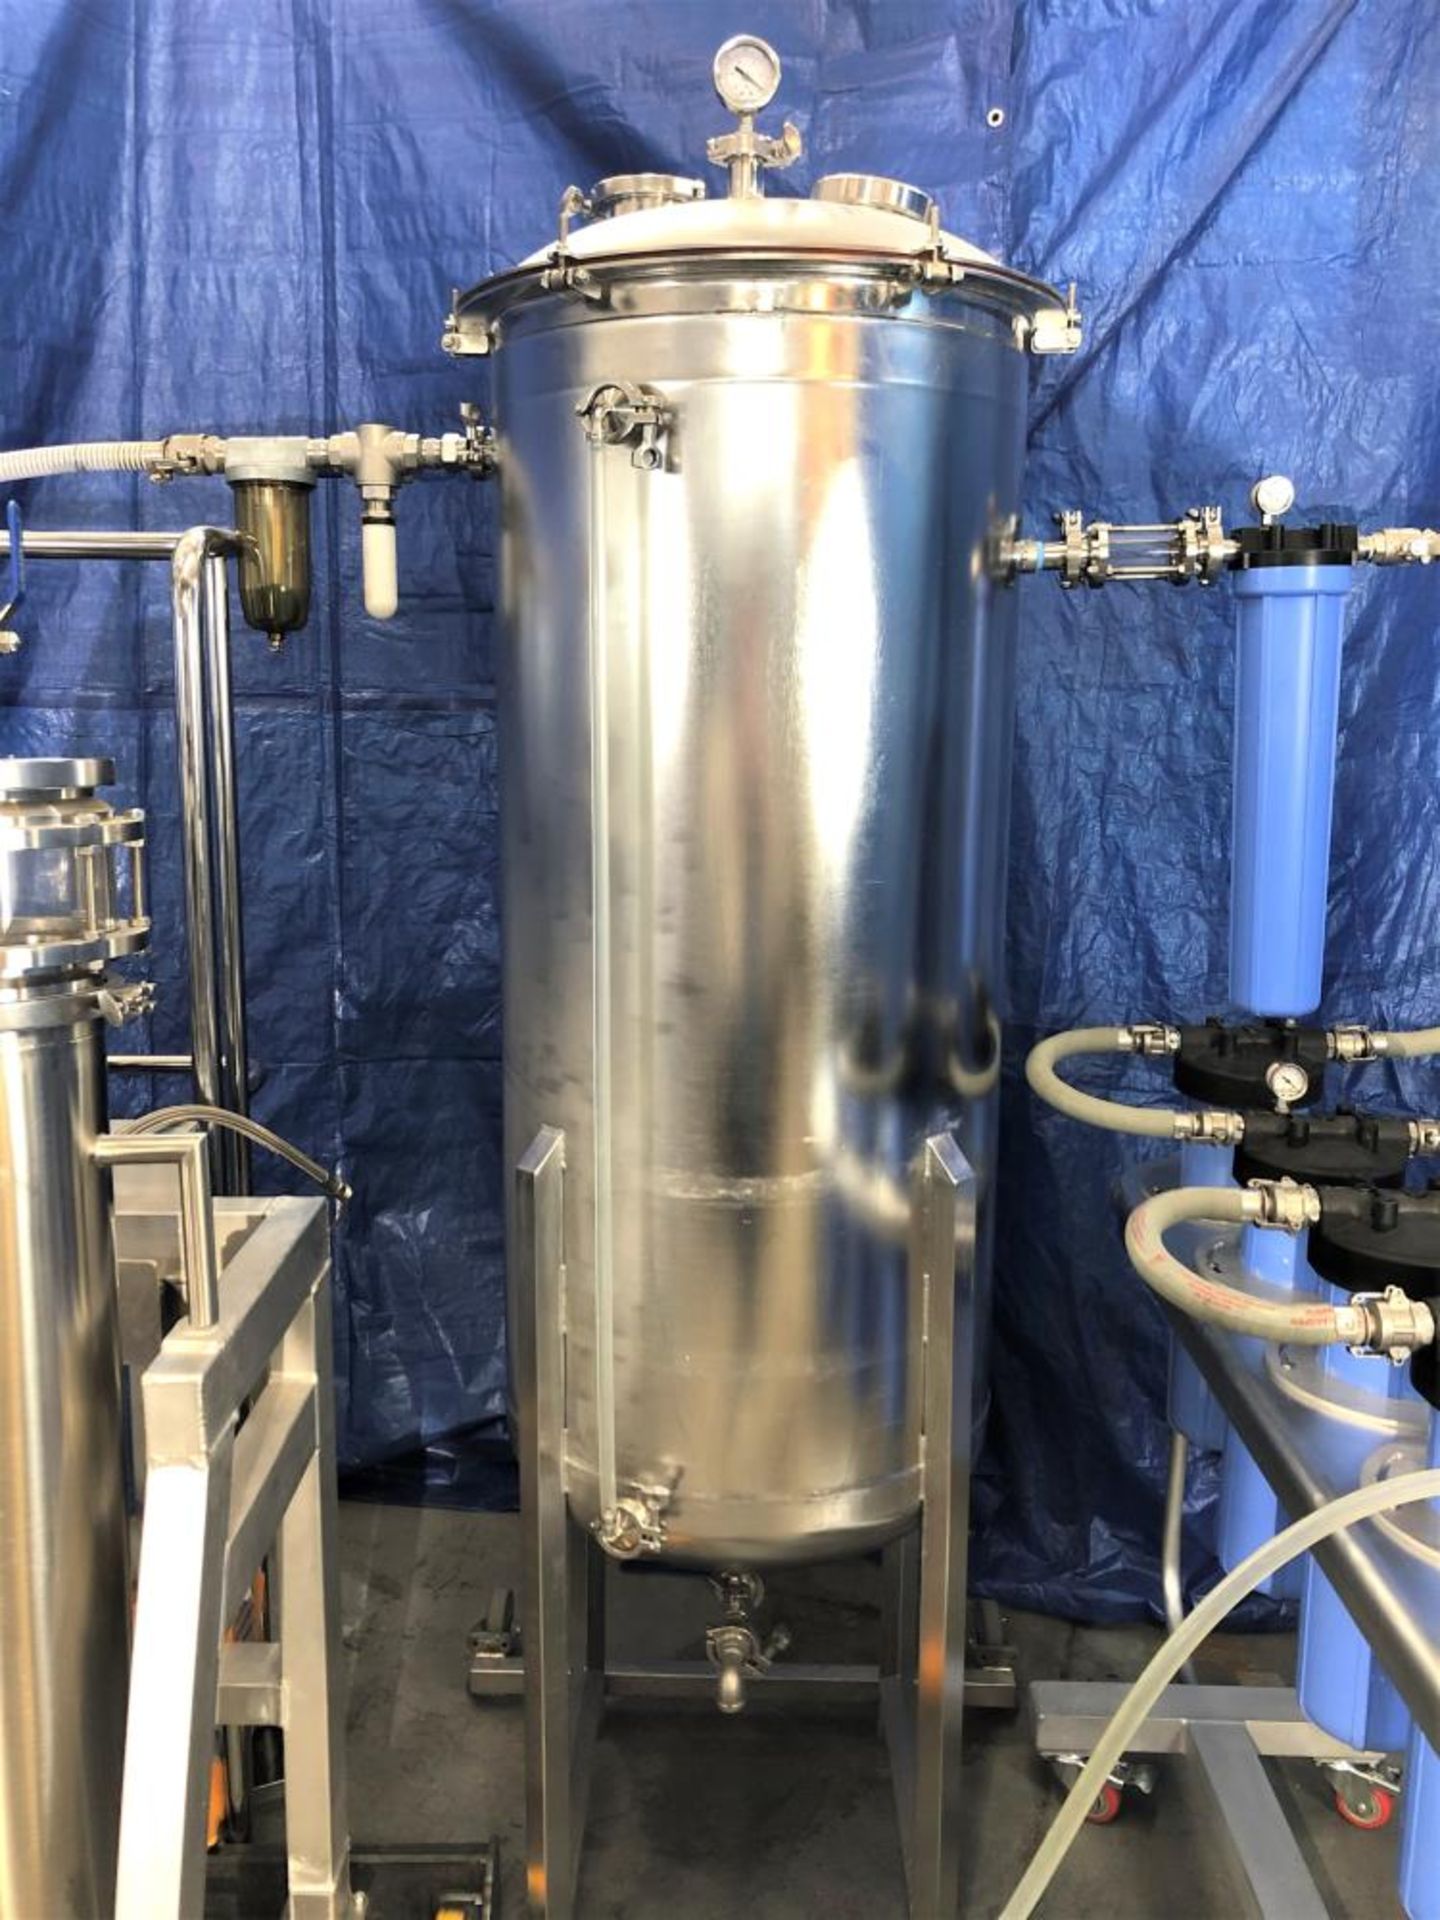 Used-Ultrasonic Ethanol Extractor, 20lb High Purity Extraction System for CBD/THC Extraction - Image 5 of 8